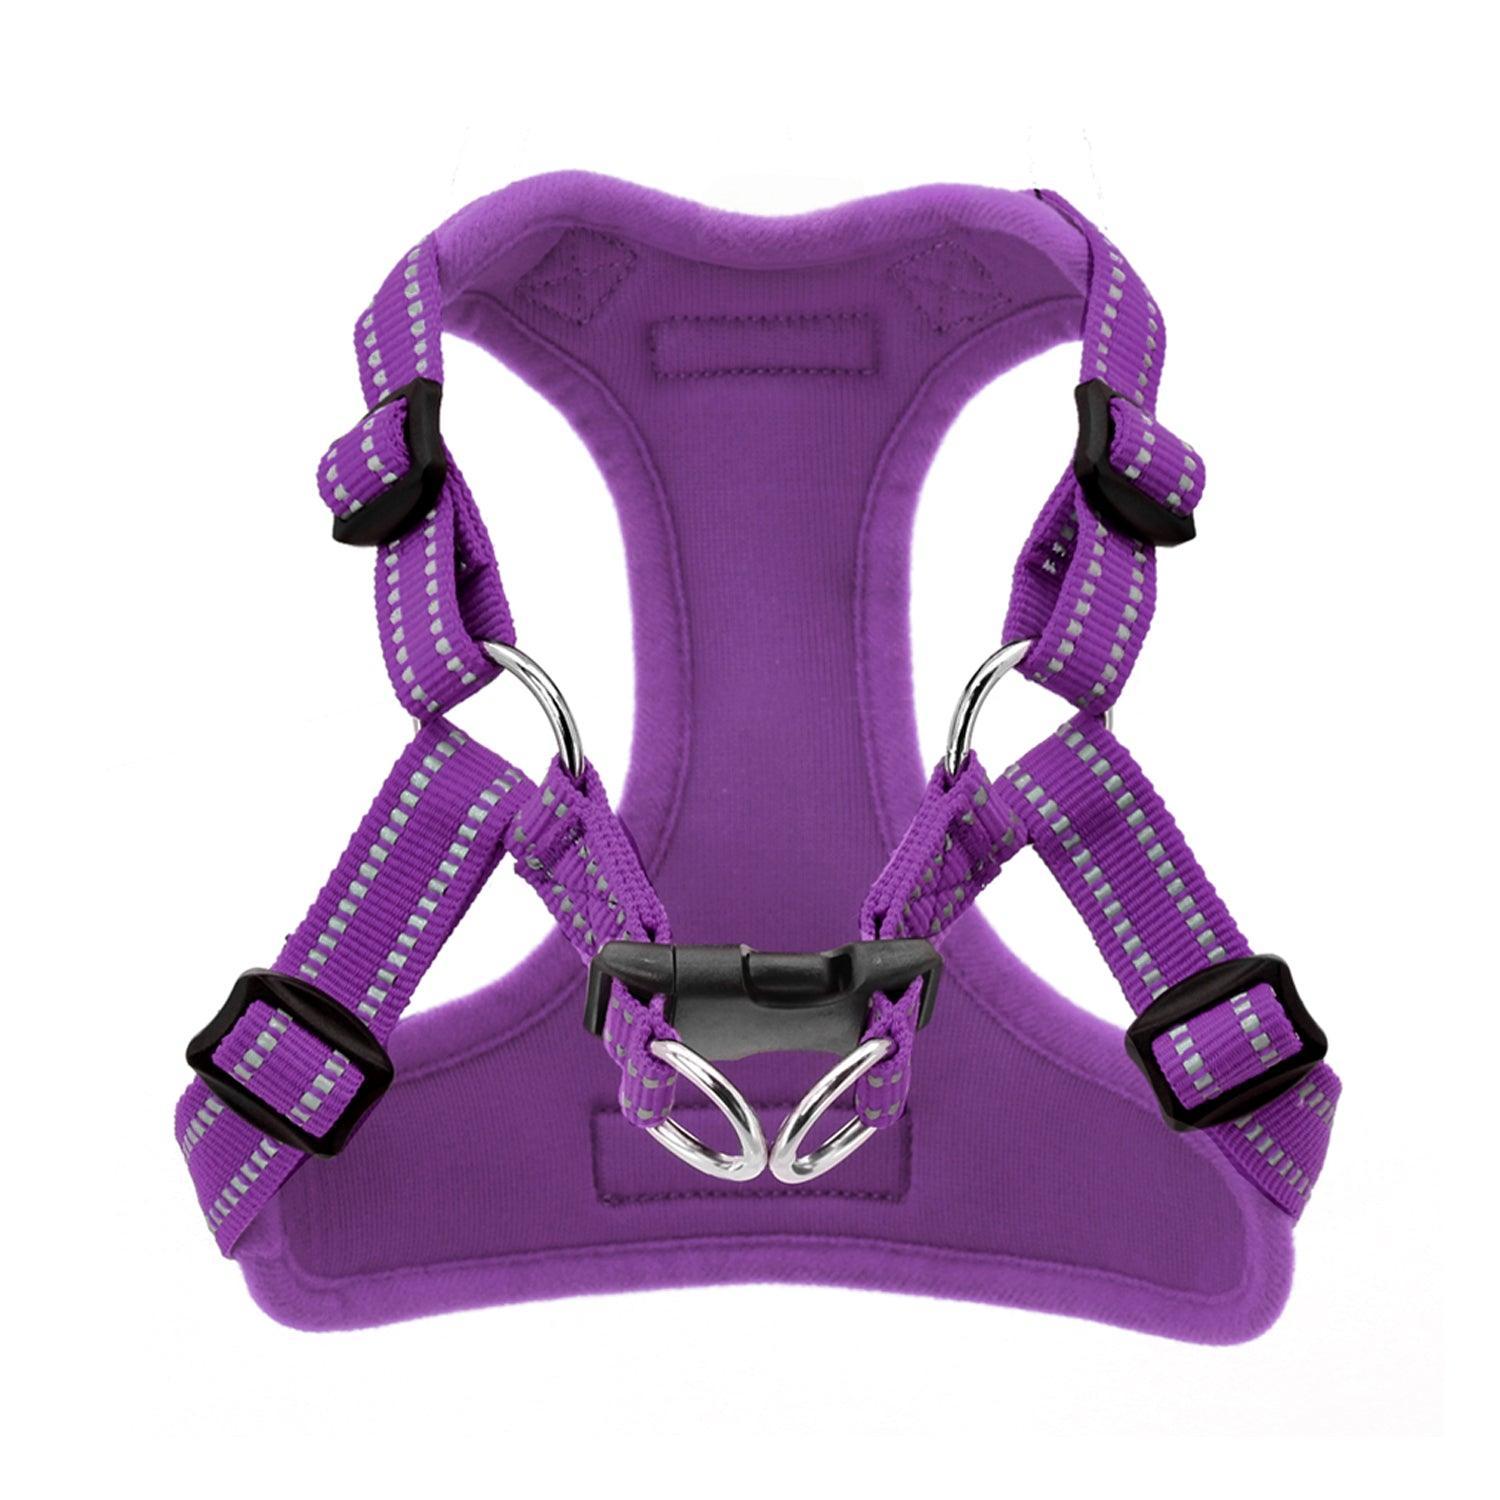 Step-In Flex Dog Harness With Soft Mesh & Adjustable Straps For Dogs -  VOYAGER Dog Harnesses